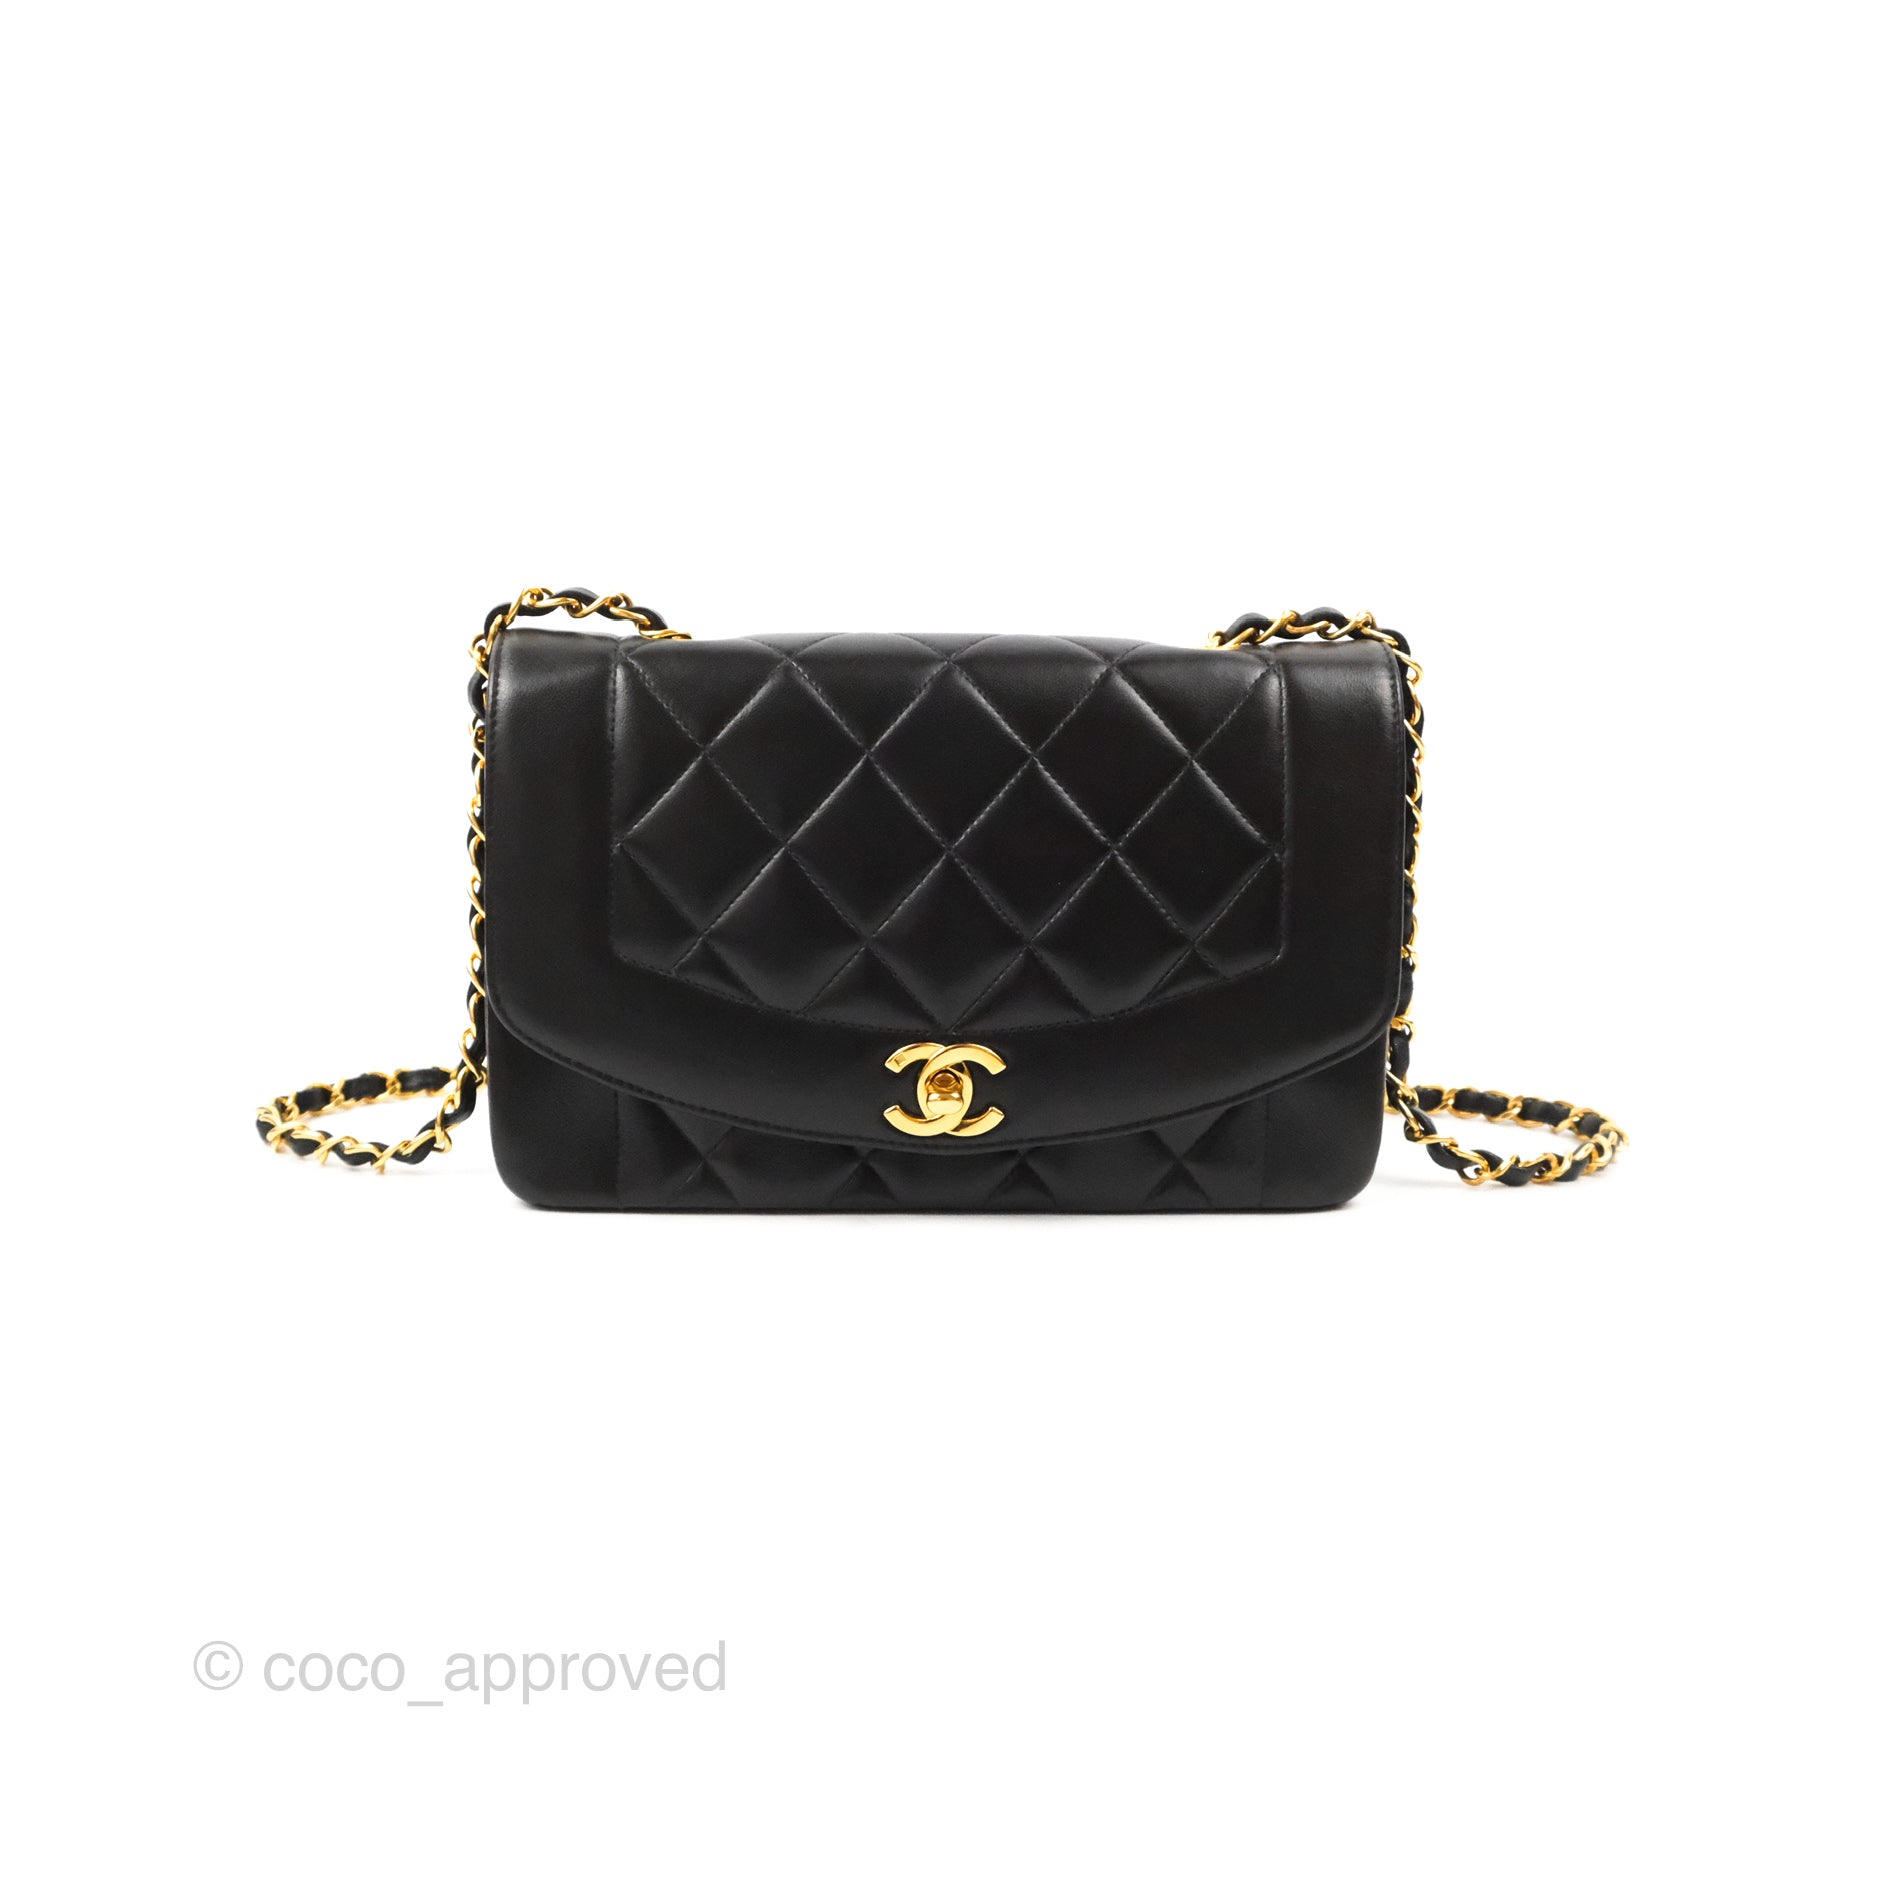 At Auction: A CHANEL VINTAGE DIANA CROSS BODY BAG